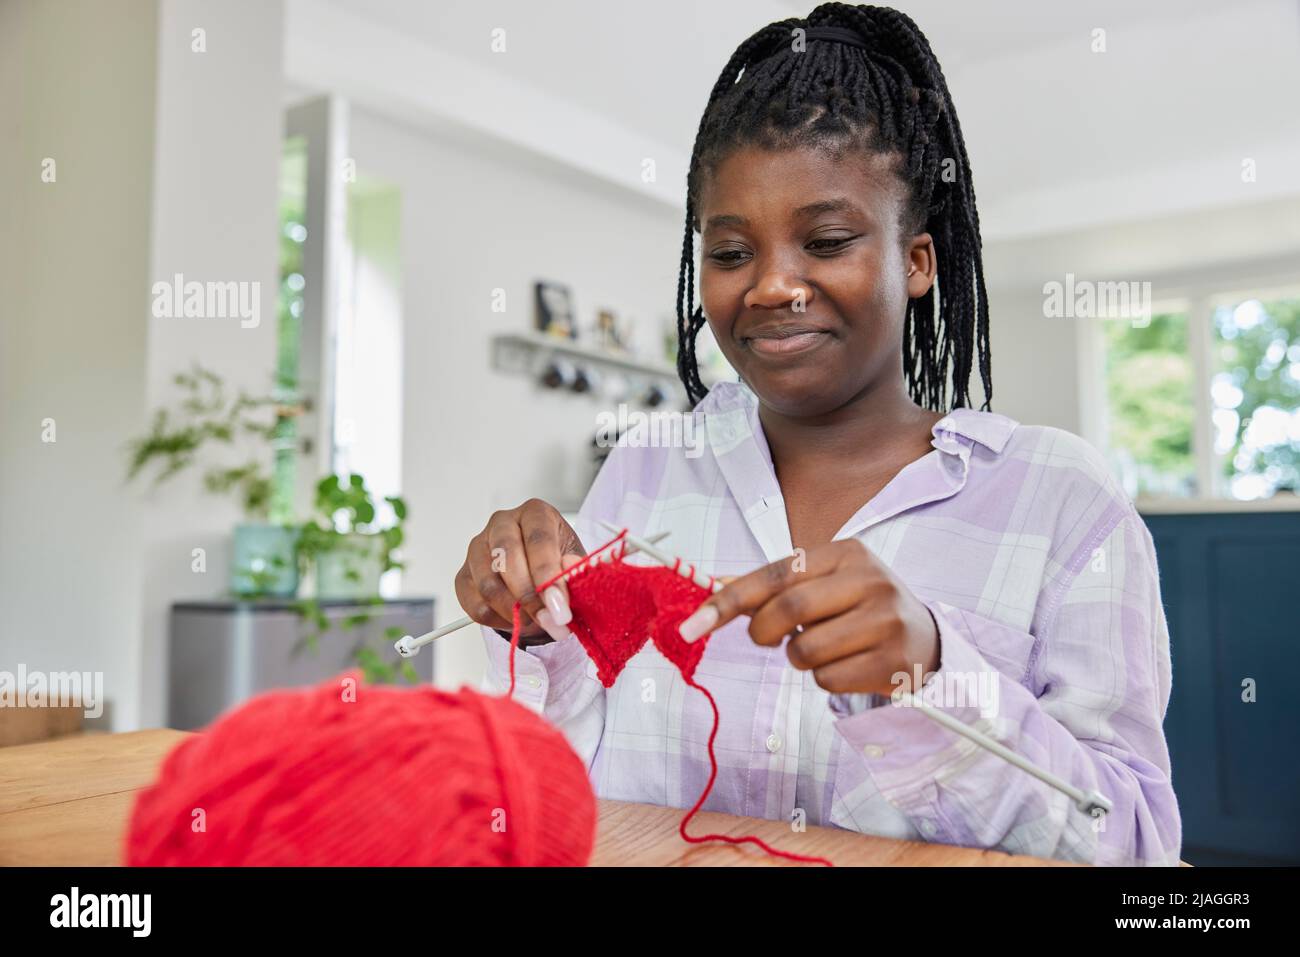 Teenage Girl With Wool Knitting On Table At Home Stock Photo